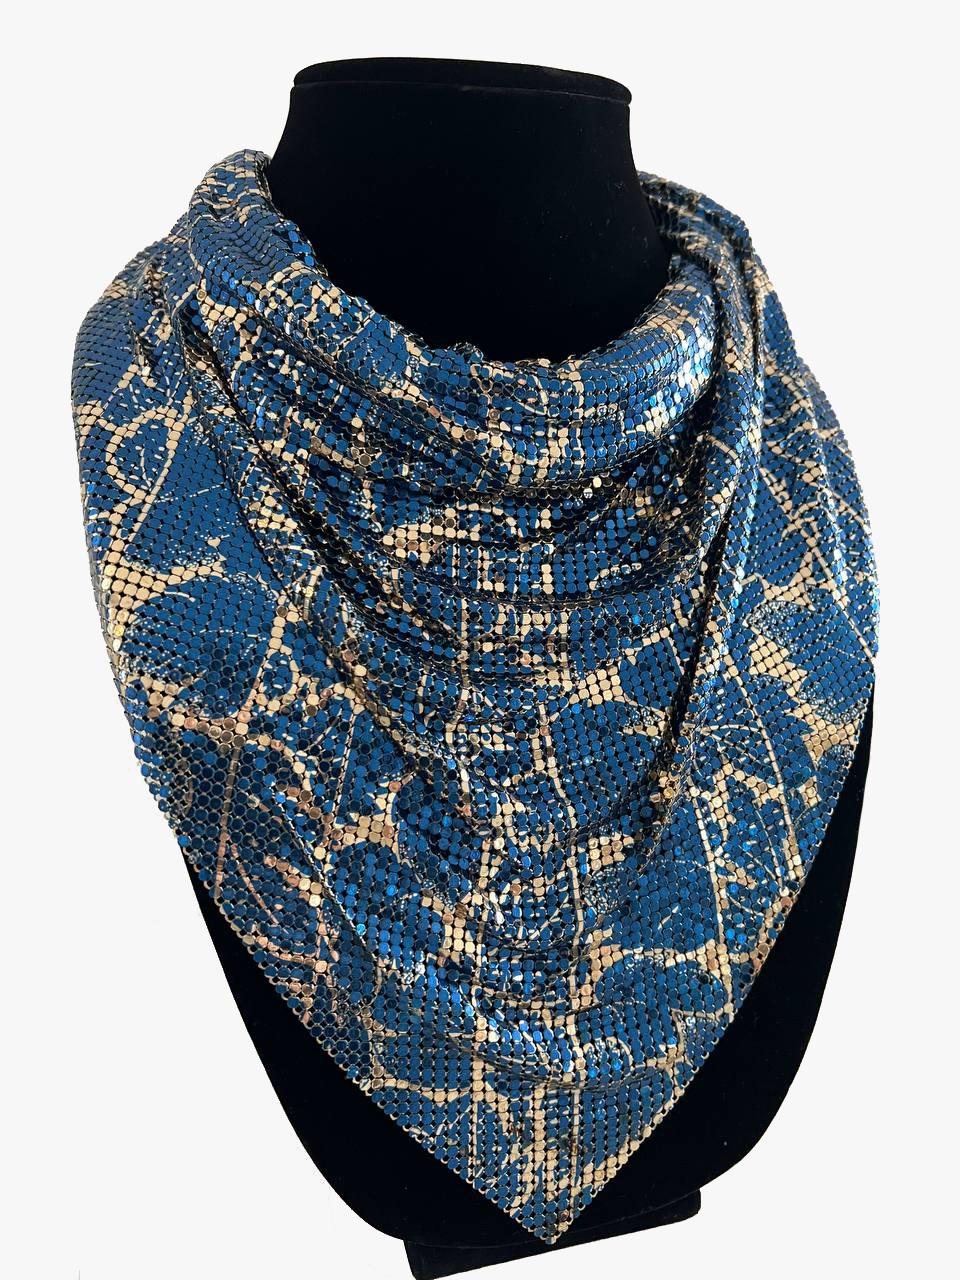 Whiting Davis rare mesh bib necklace

A wonderful blue and gold mesh bib necklace that when worn resembles an elegantly styled scarf around the neck.

The necklace fastens by a simple hook that connects to a series of chain links on the opposite